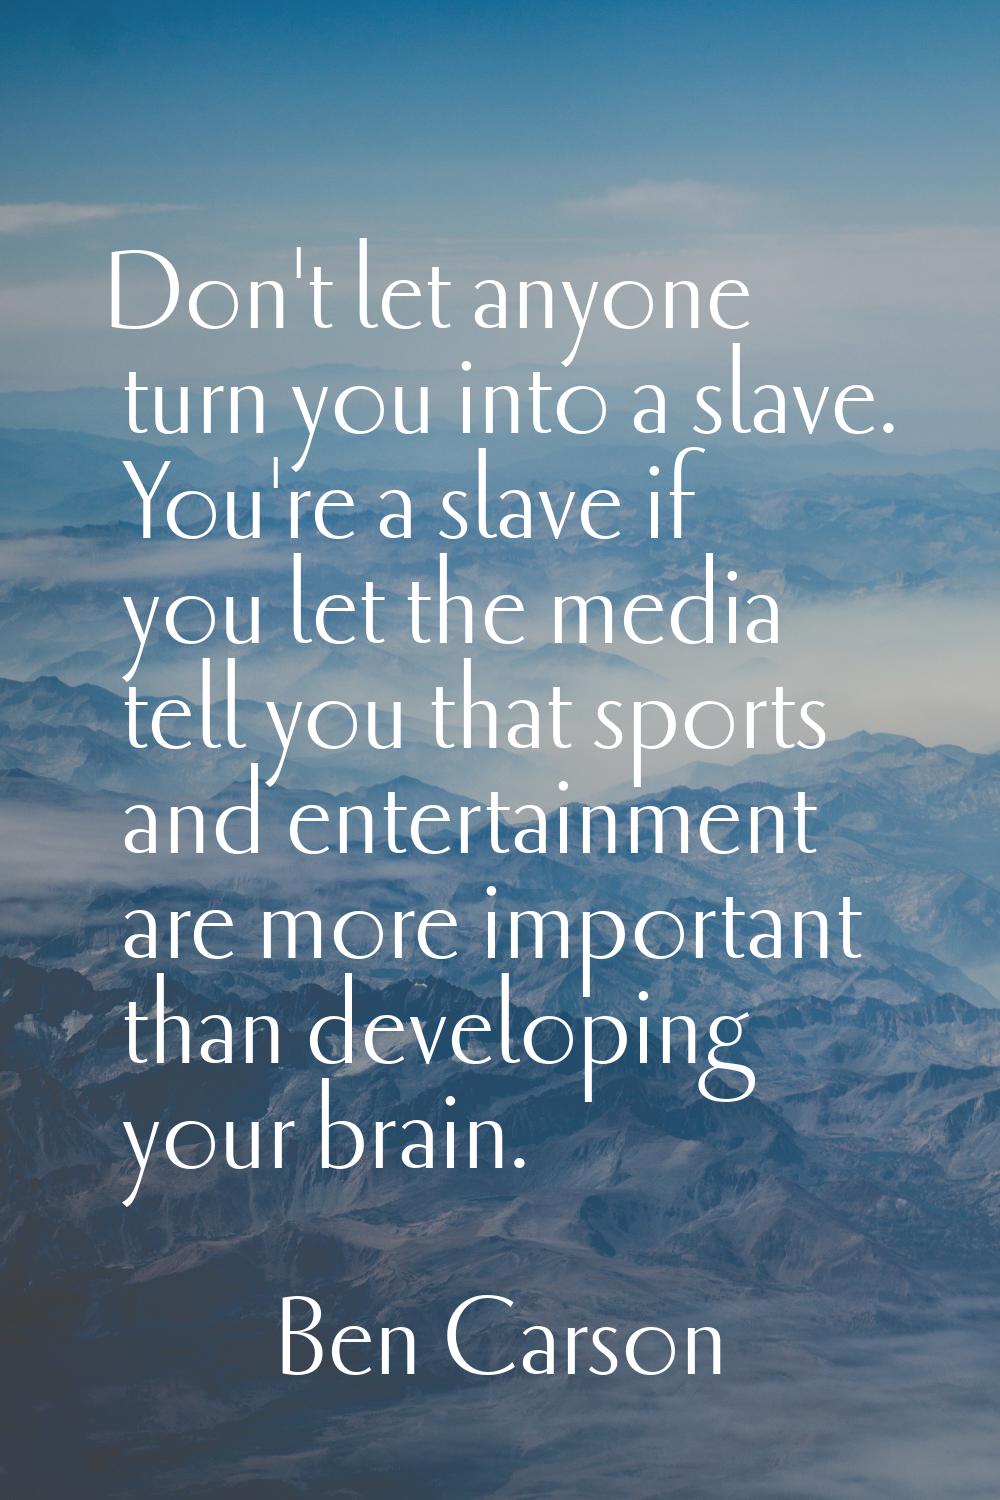 Don't let anyone turn you into a slave. You're a slave if you let the media tell you that sports an